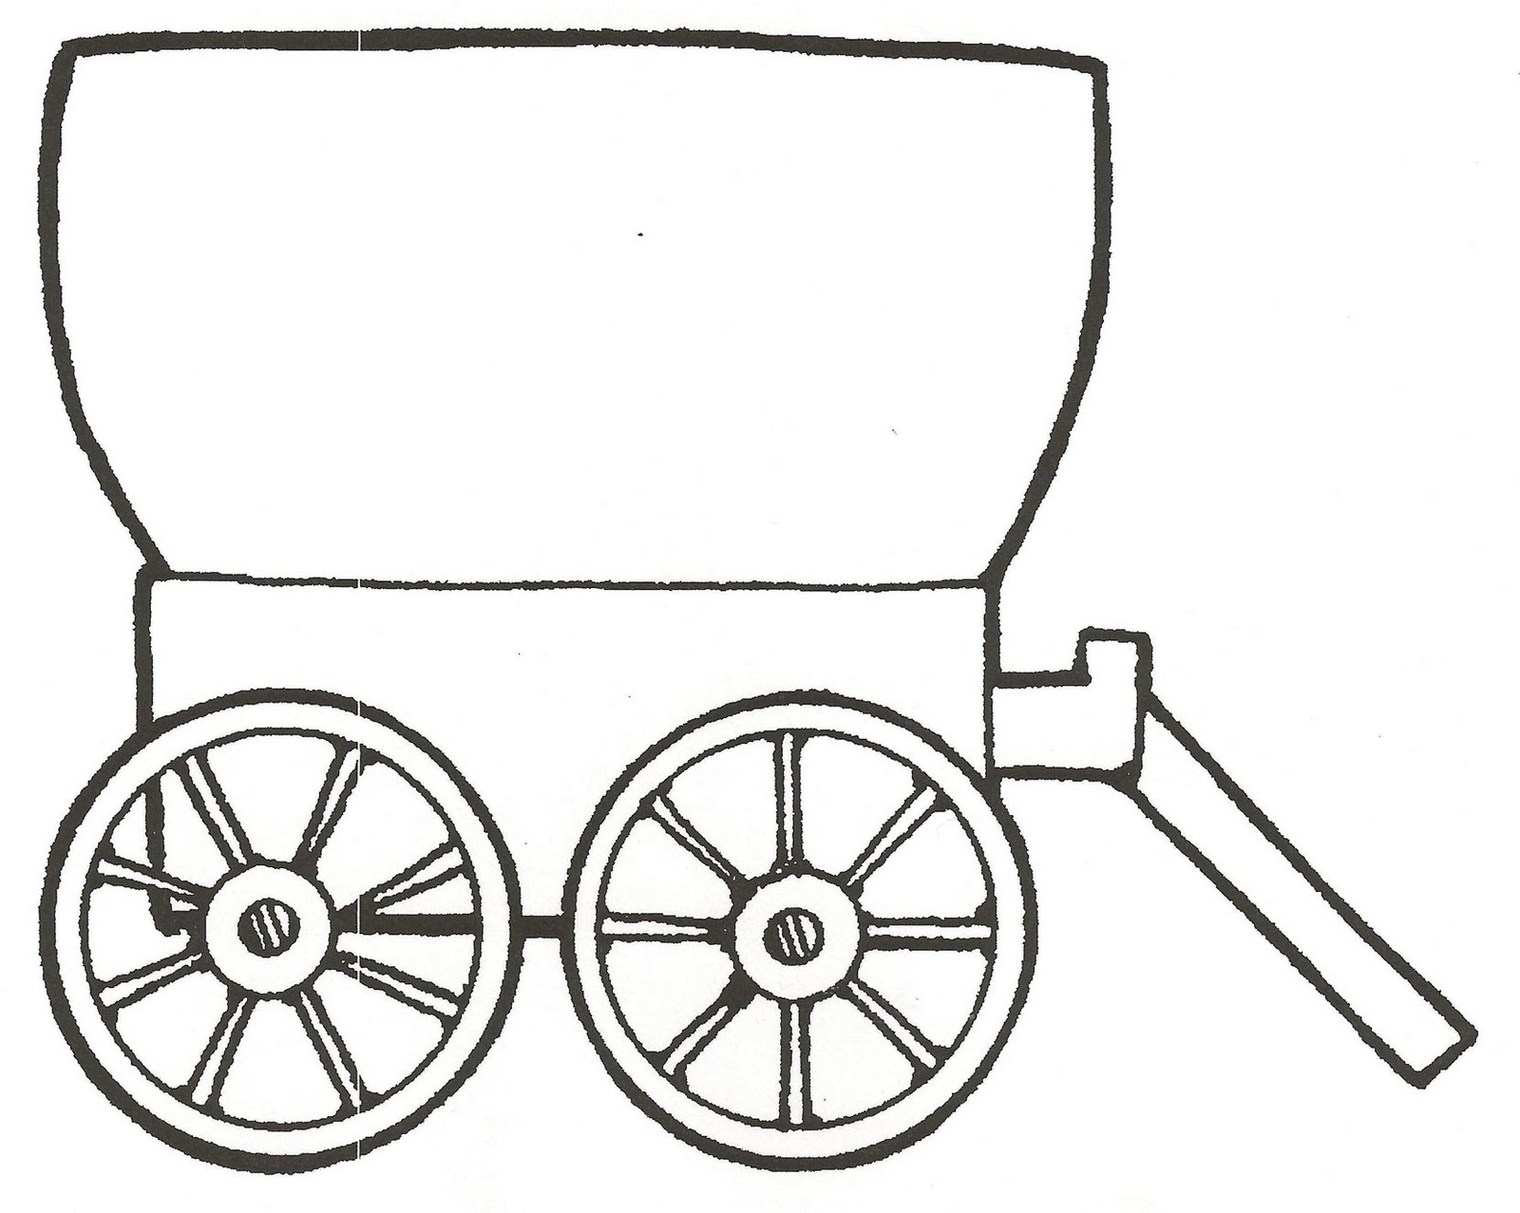 Covered Wagon Clipart; Wagon Clip Art Clipart - Free to use Clip Art Resource .